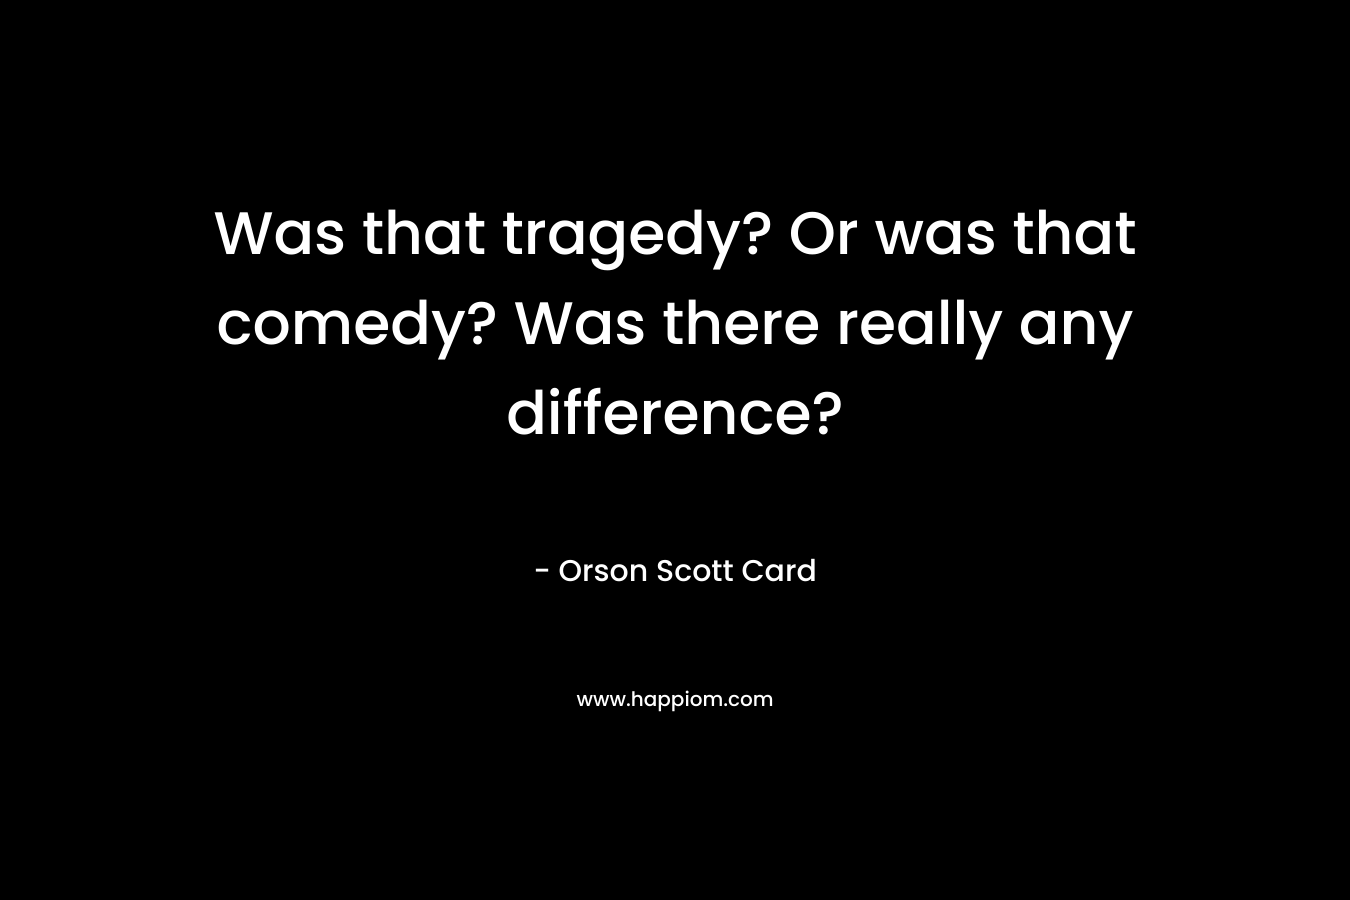 Was that tragedy? Or was that comedy? Was there really any difference?